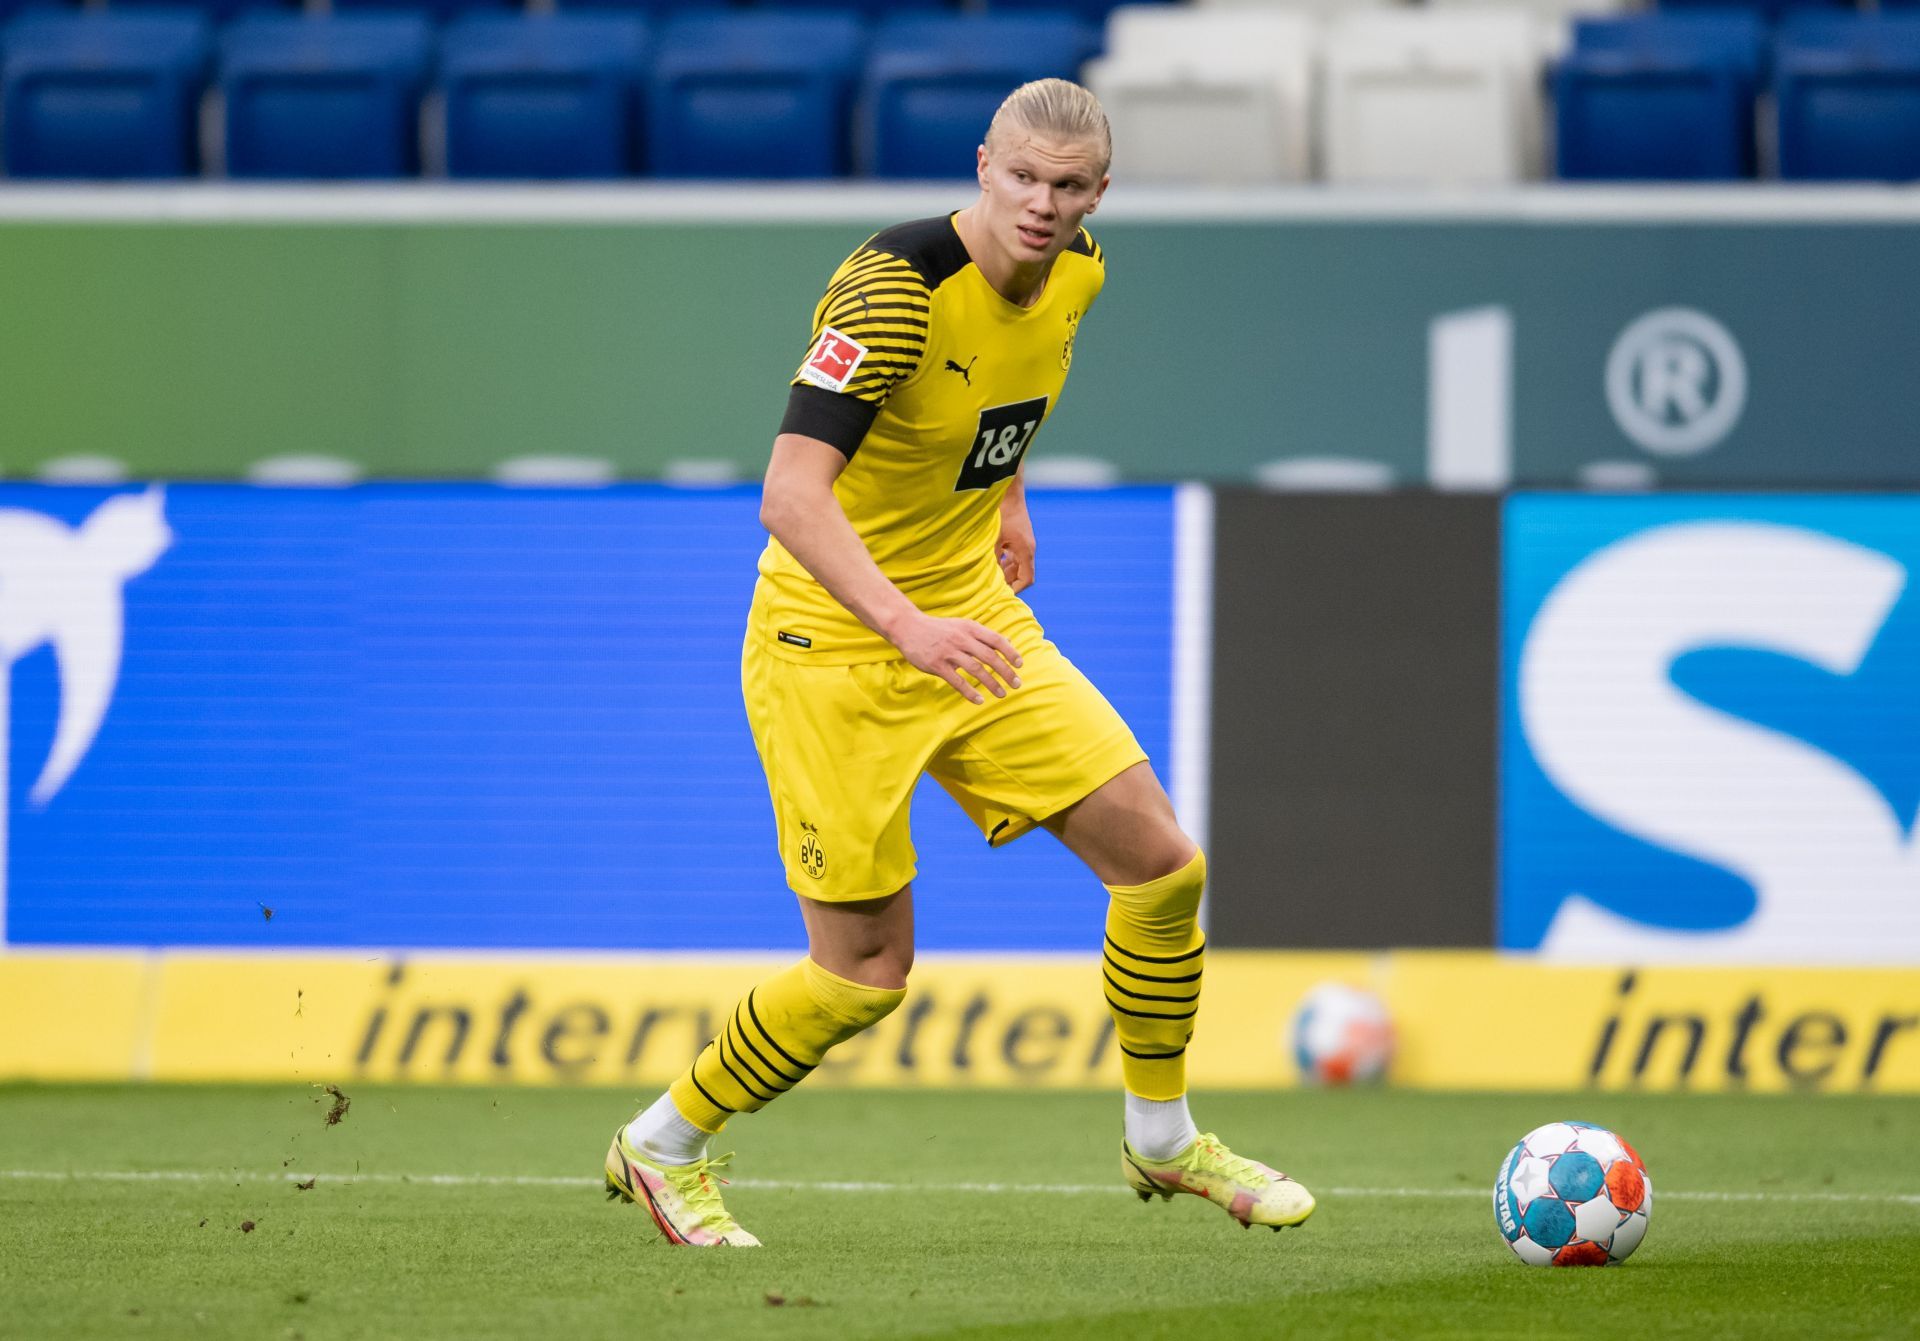 Erling Haaland is one of the best forwards in the world right now.